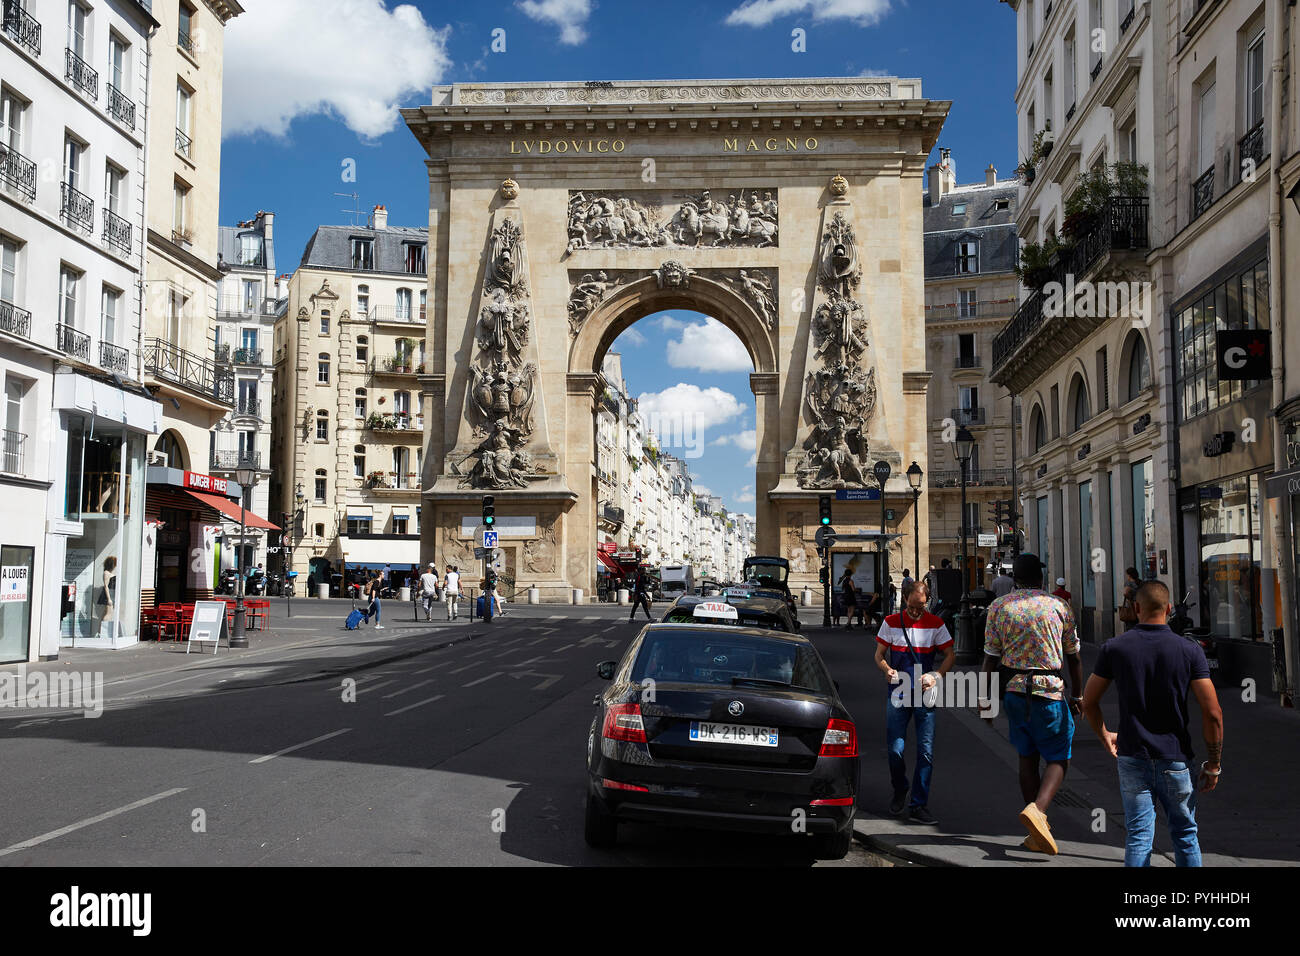 Paris, Ile-de-France, France - View from the Rue Saint-Denis in the 10th arrondissement to the monument Porte Saint-Denis, a monument in the form of a triumphal arch. Stock Photo